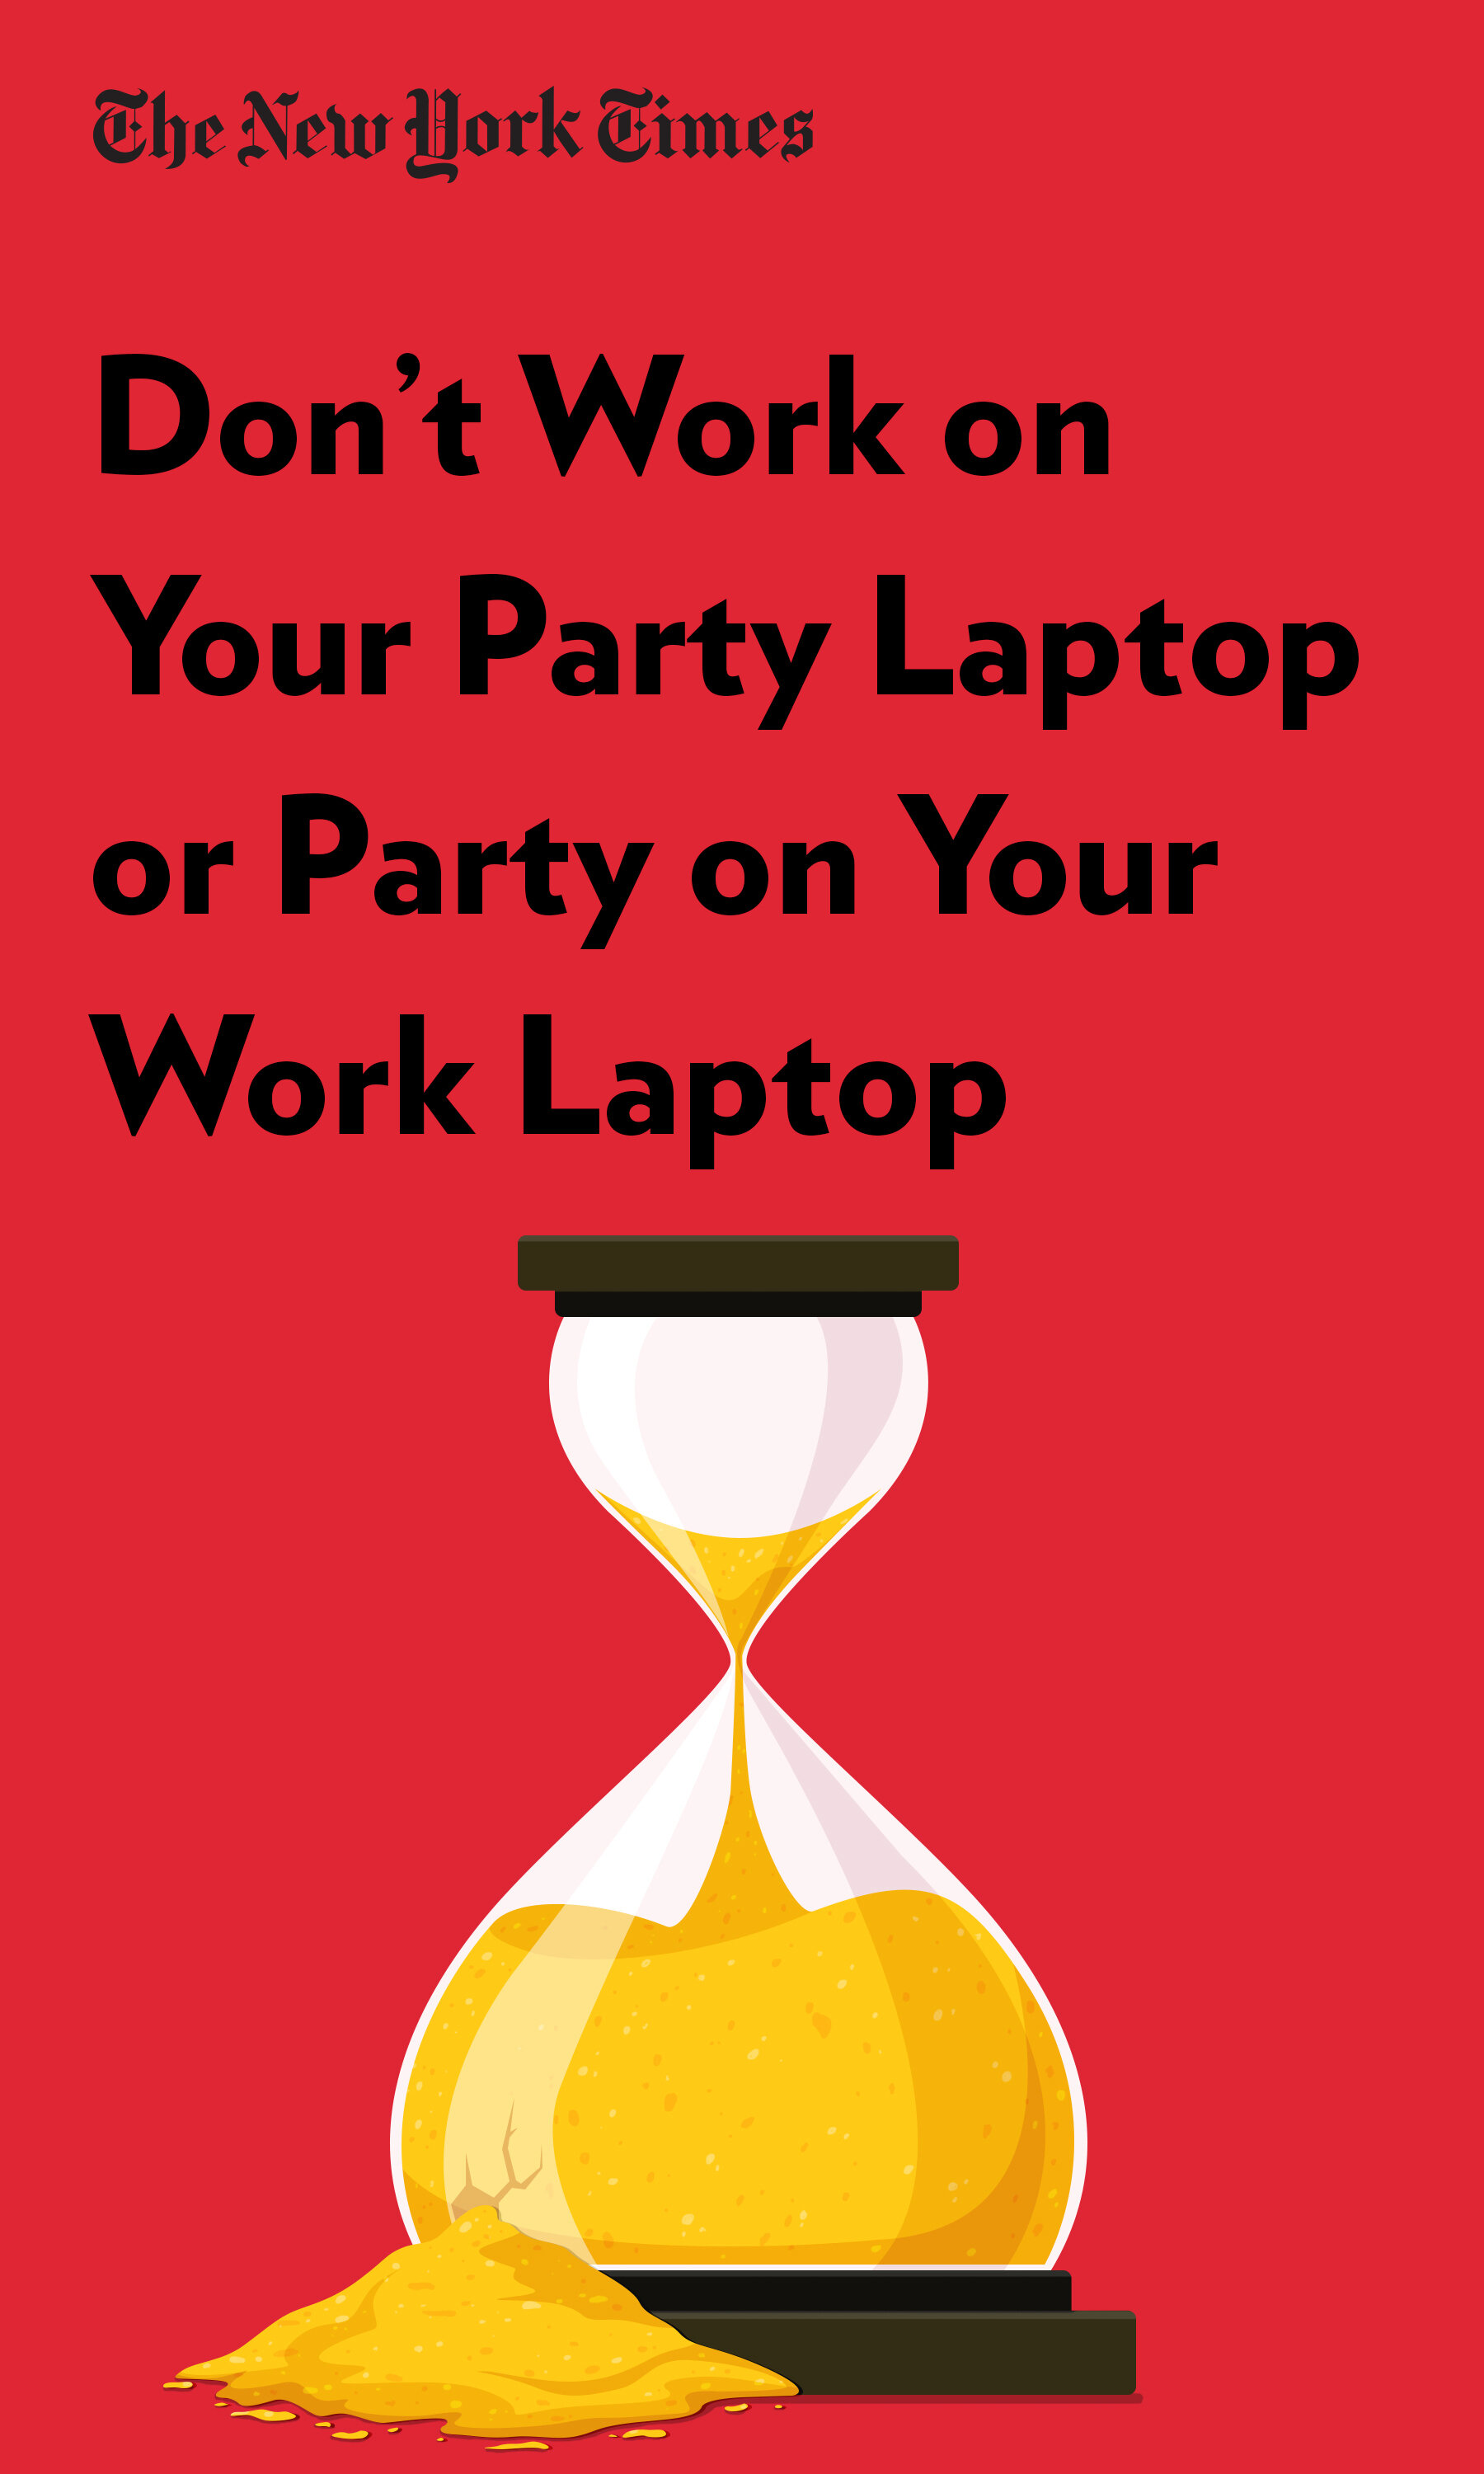 Don't-Work-on-Your-Party-Laptop-or-Party-on-Your-Work-Laptop-eBook.jpg